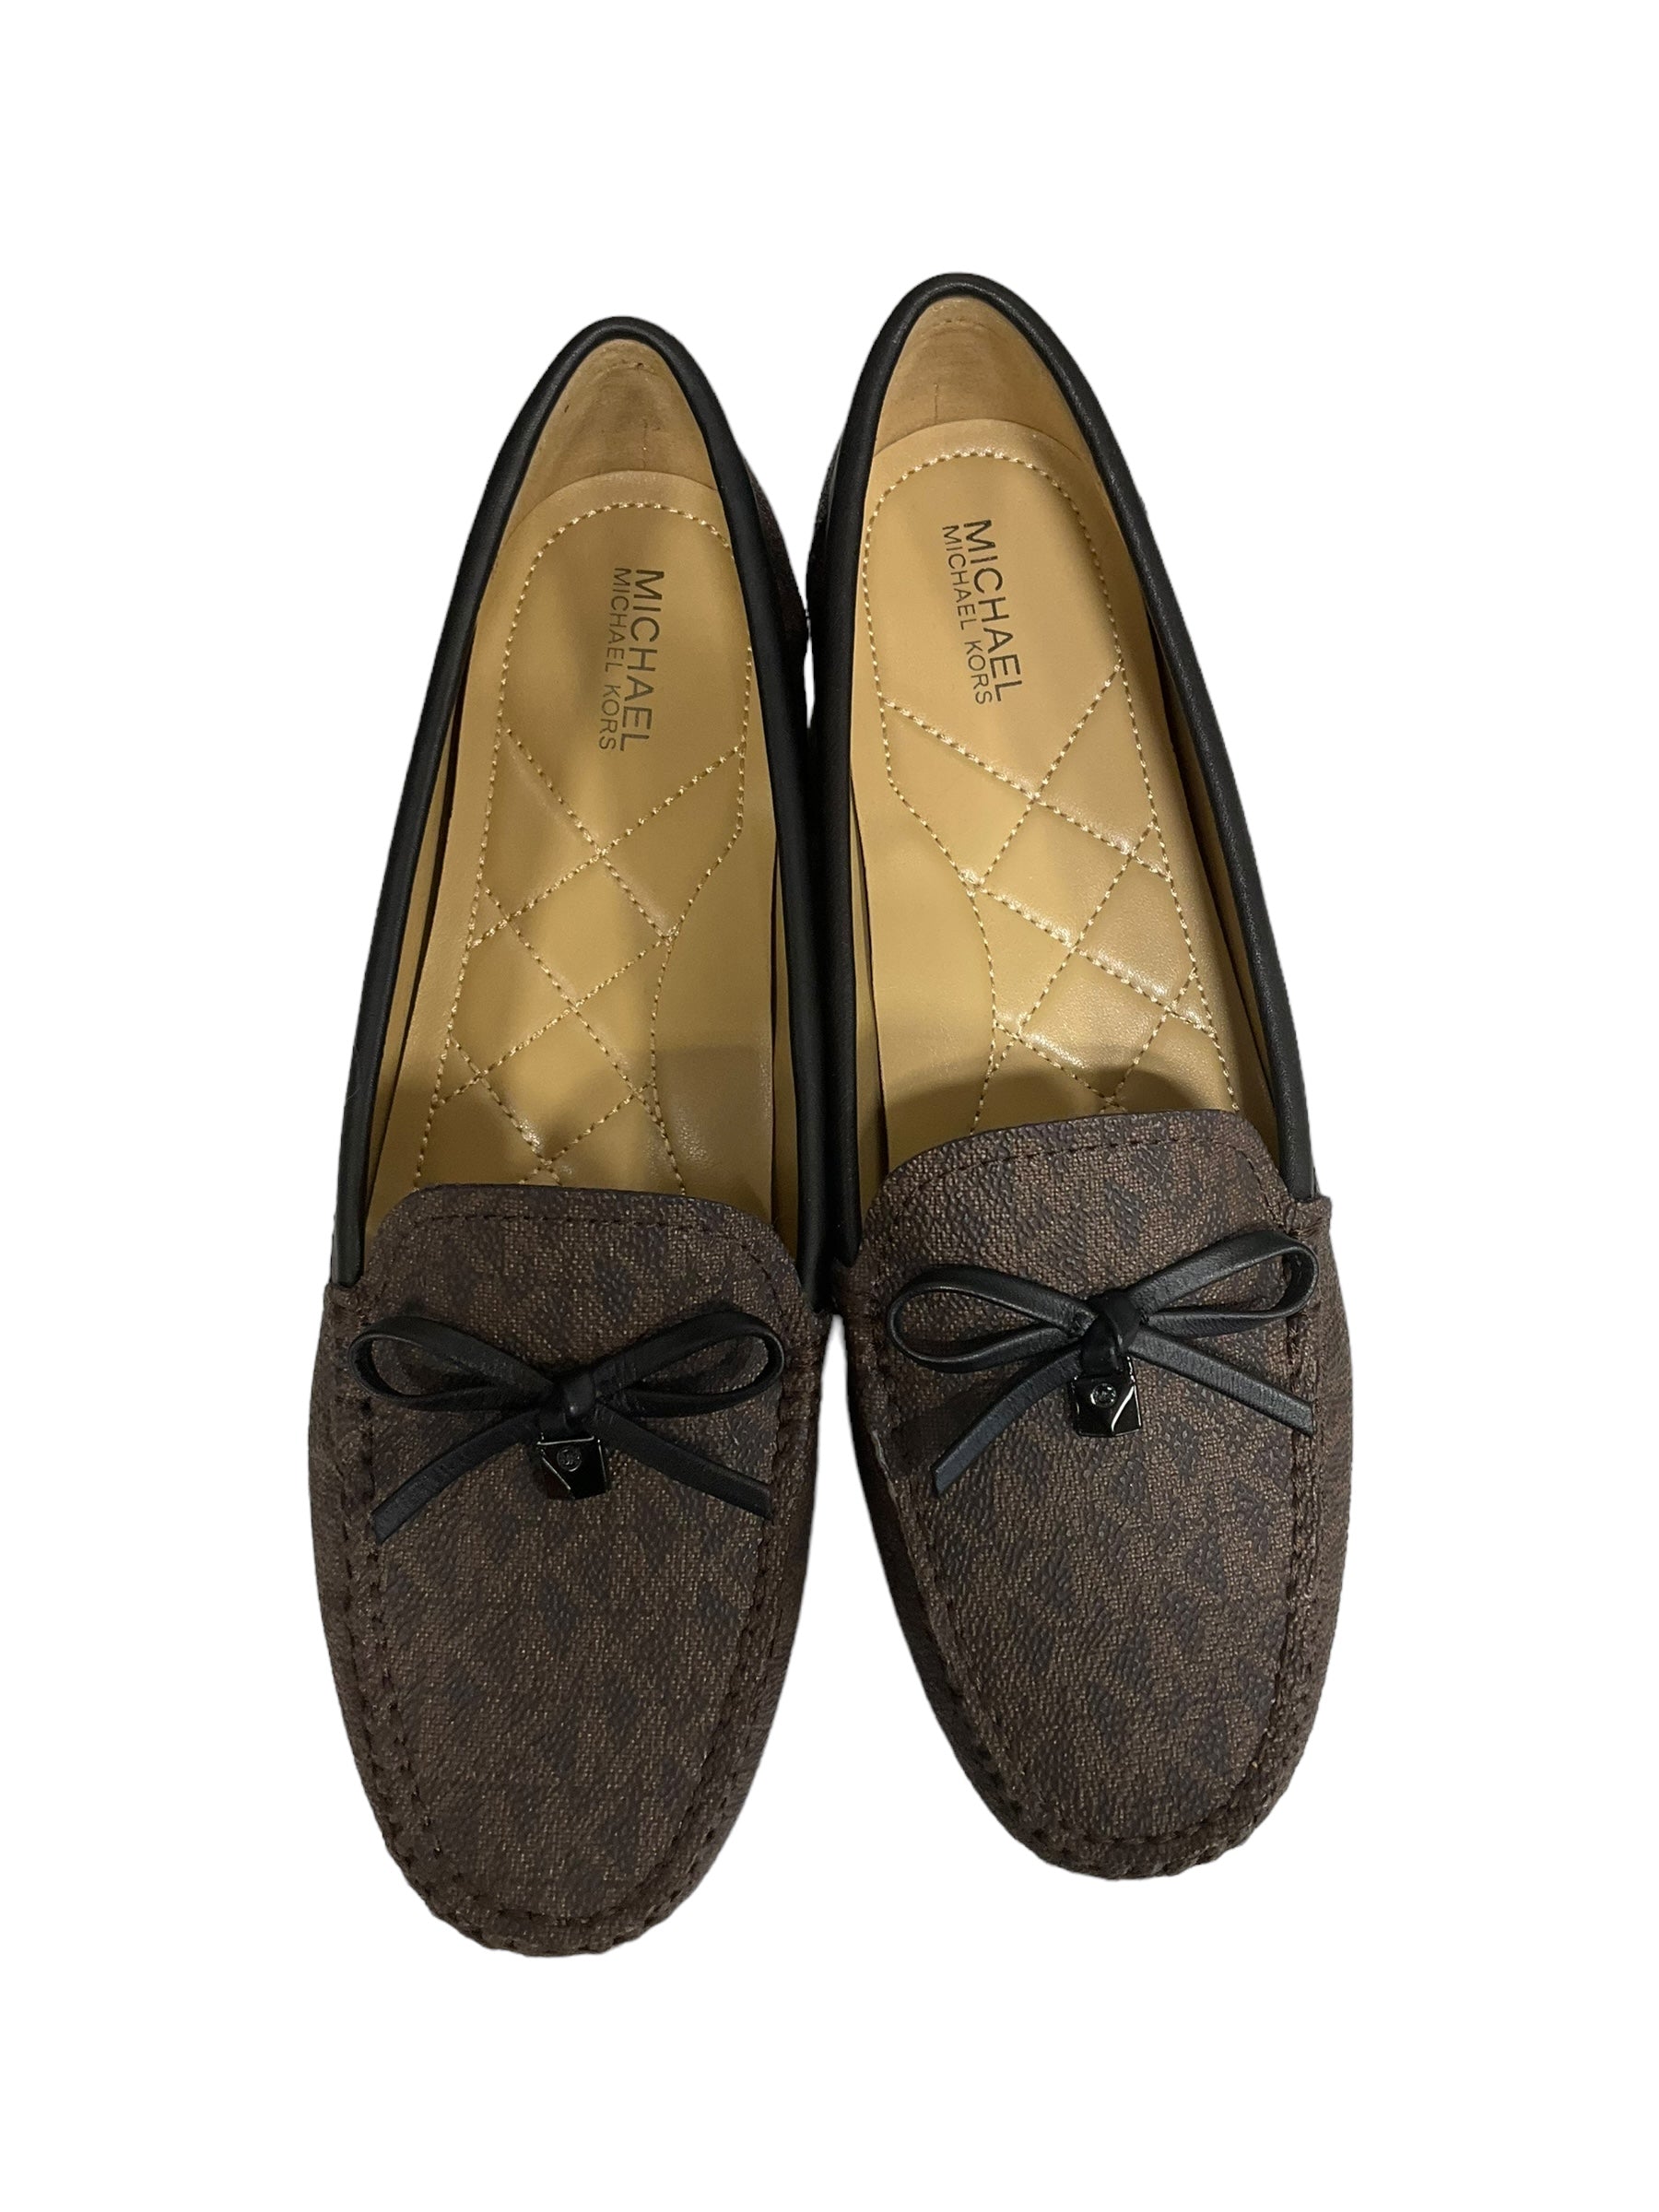 Shoes Flats By Michael By Michael Kors Size: 6.5 – Clothes Mentor